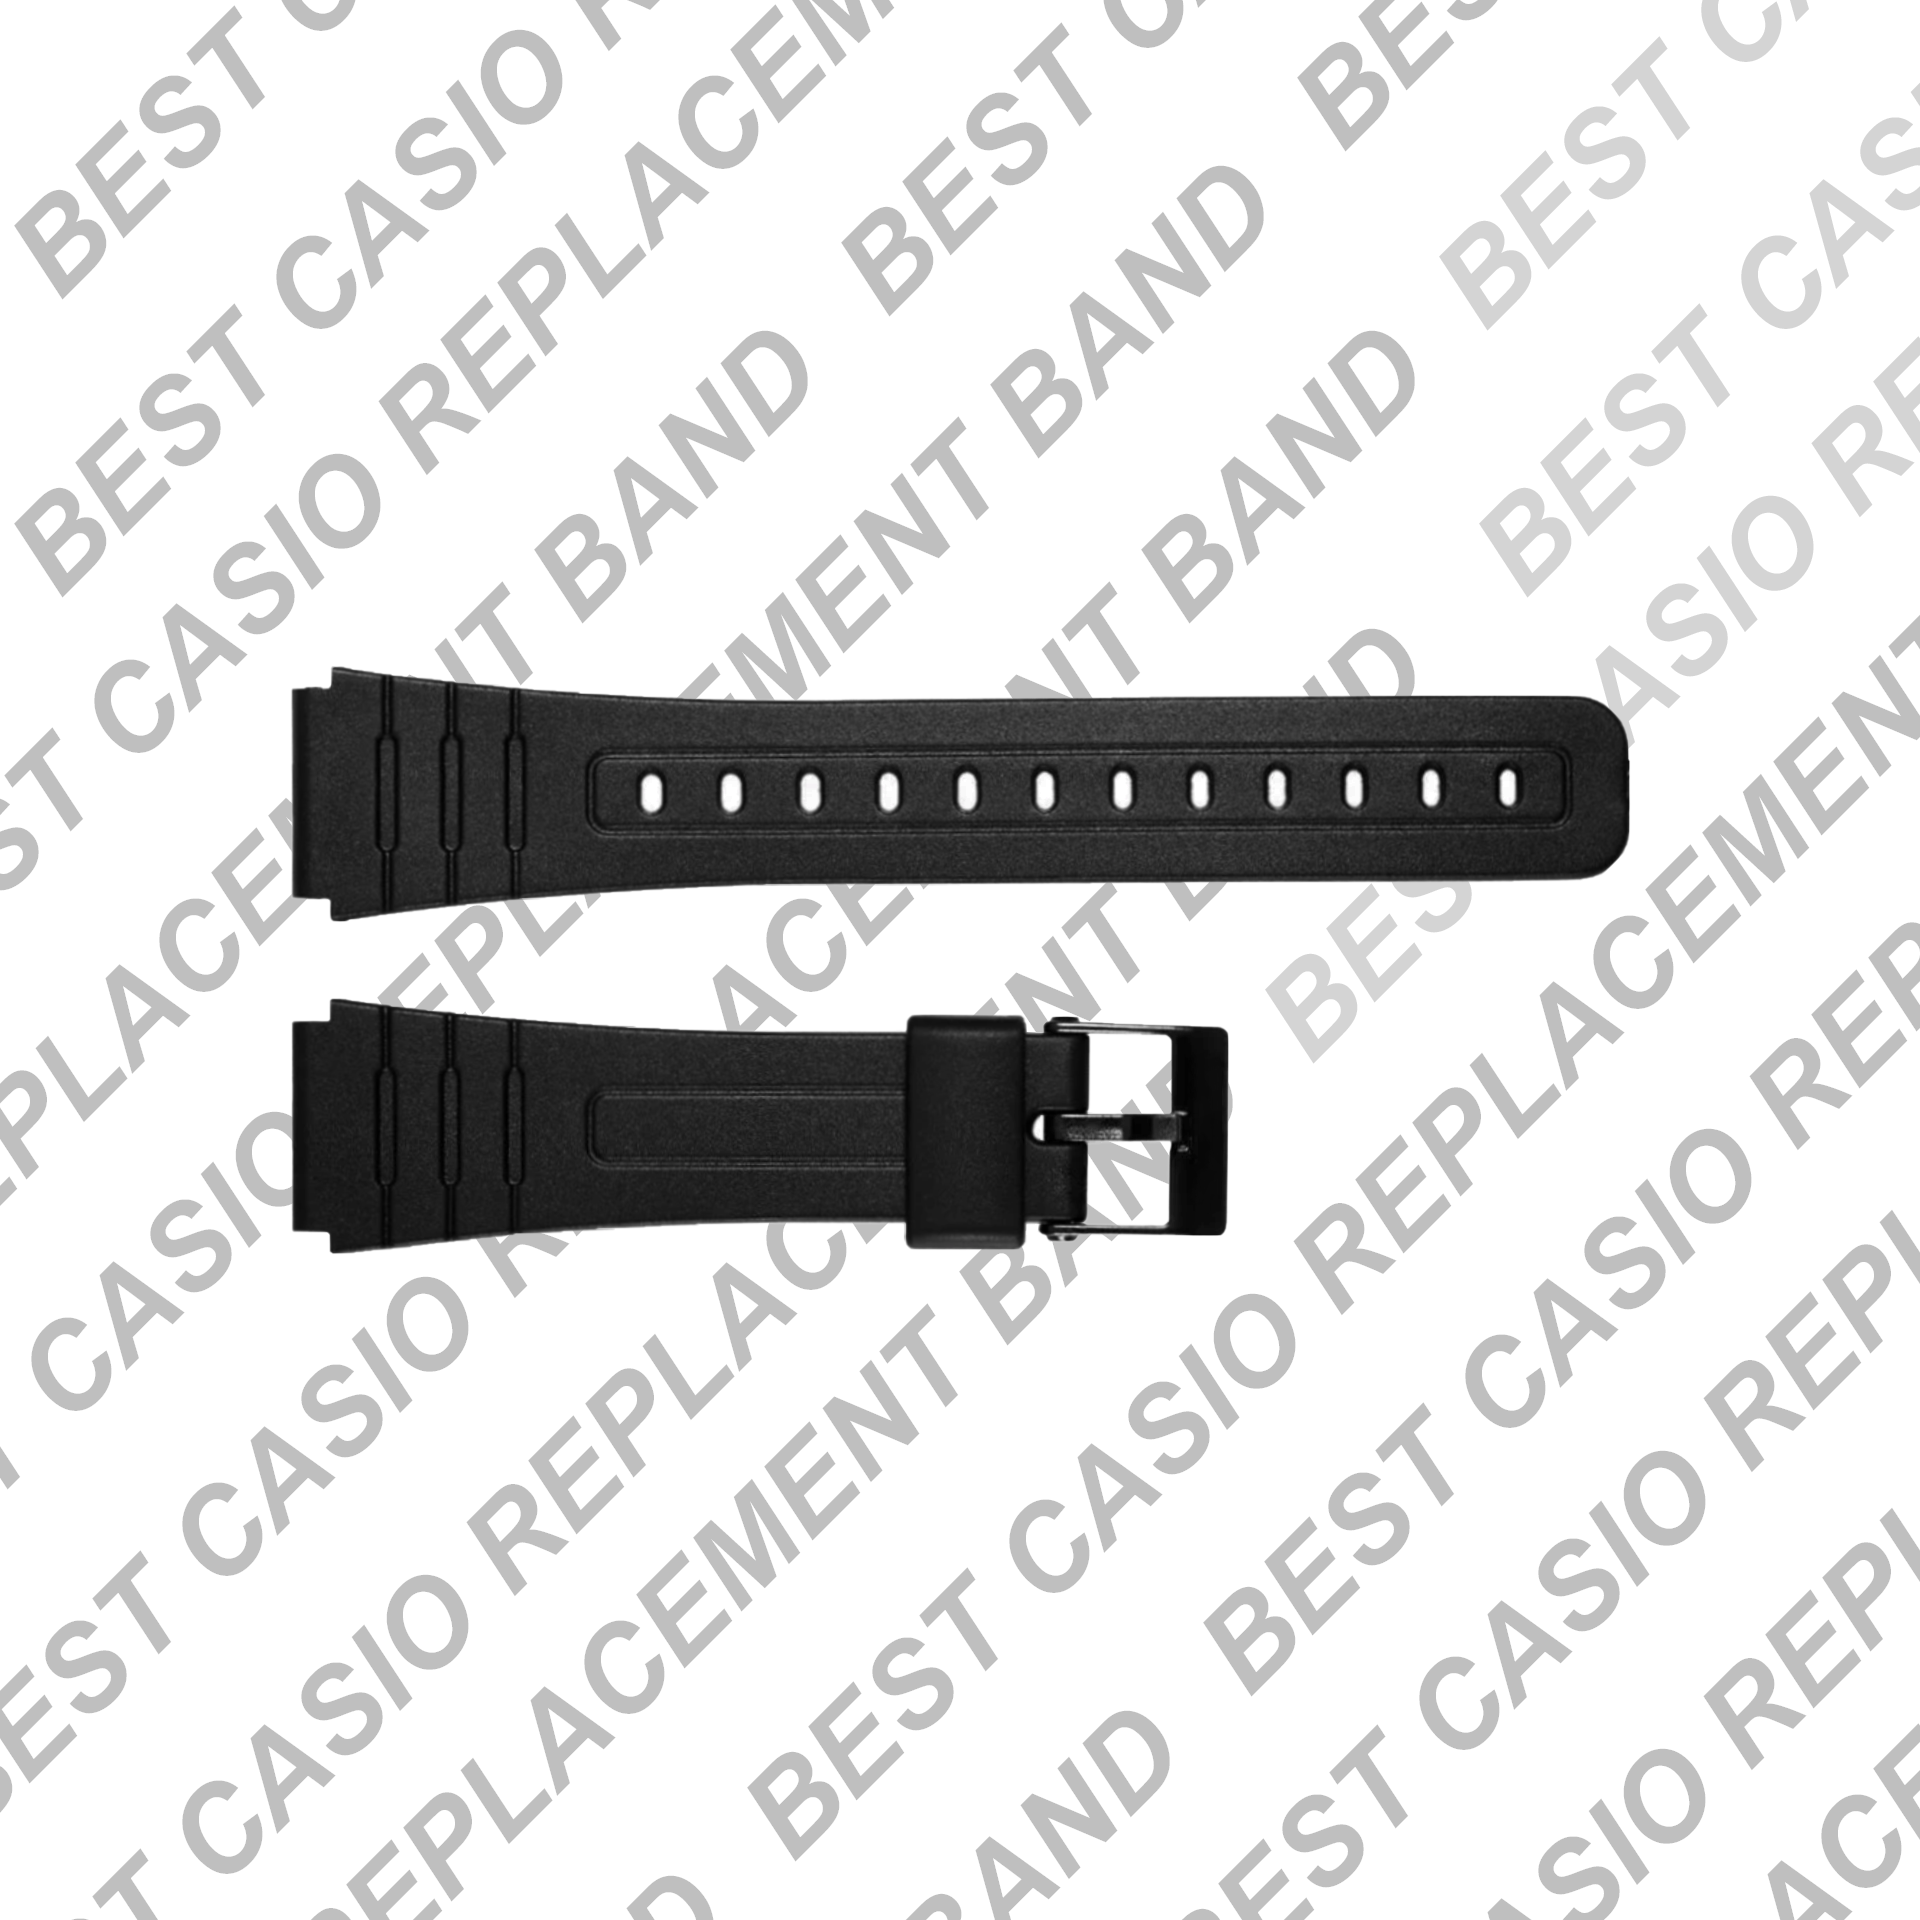 GD350 Band Only Casio Bands Baby G Bands G Shock Bands Online Casio Bands  Baby G Bands G Shock Bands  G Life Watches